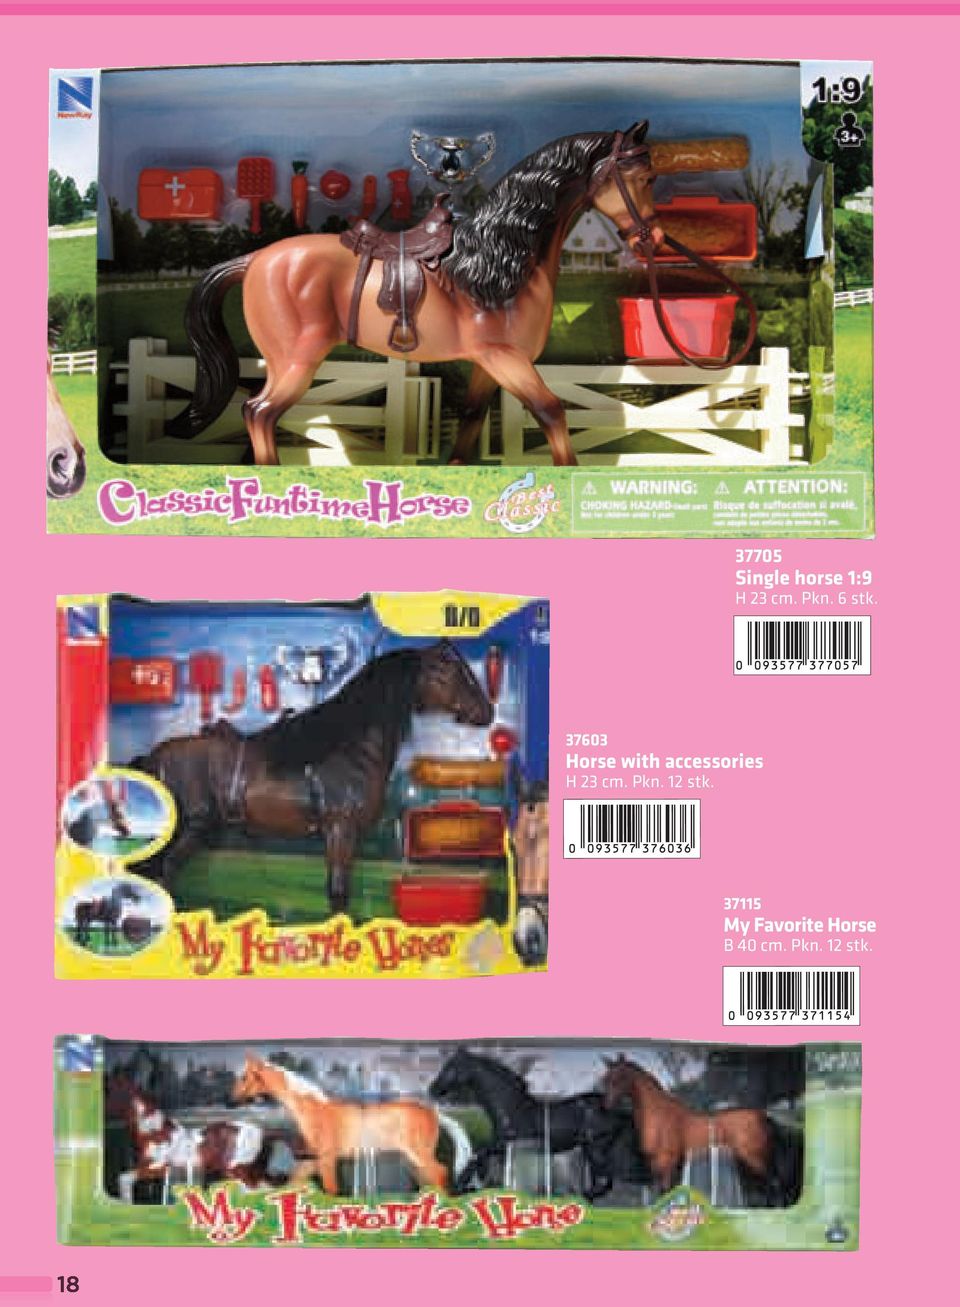 37603 Horse with accessories